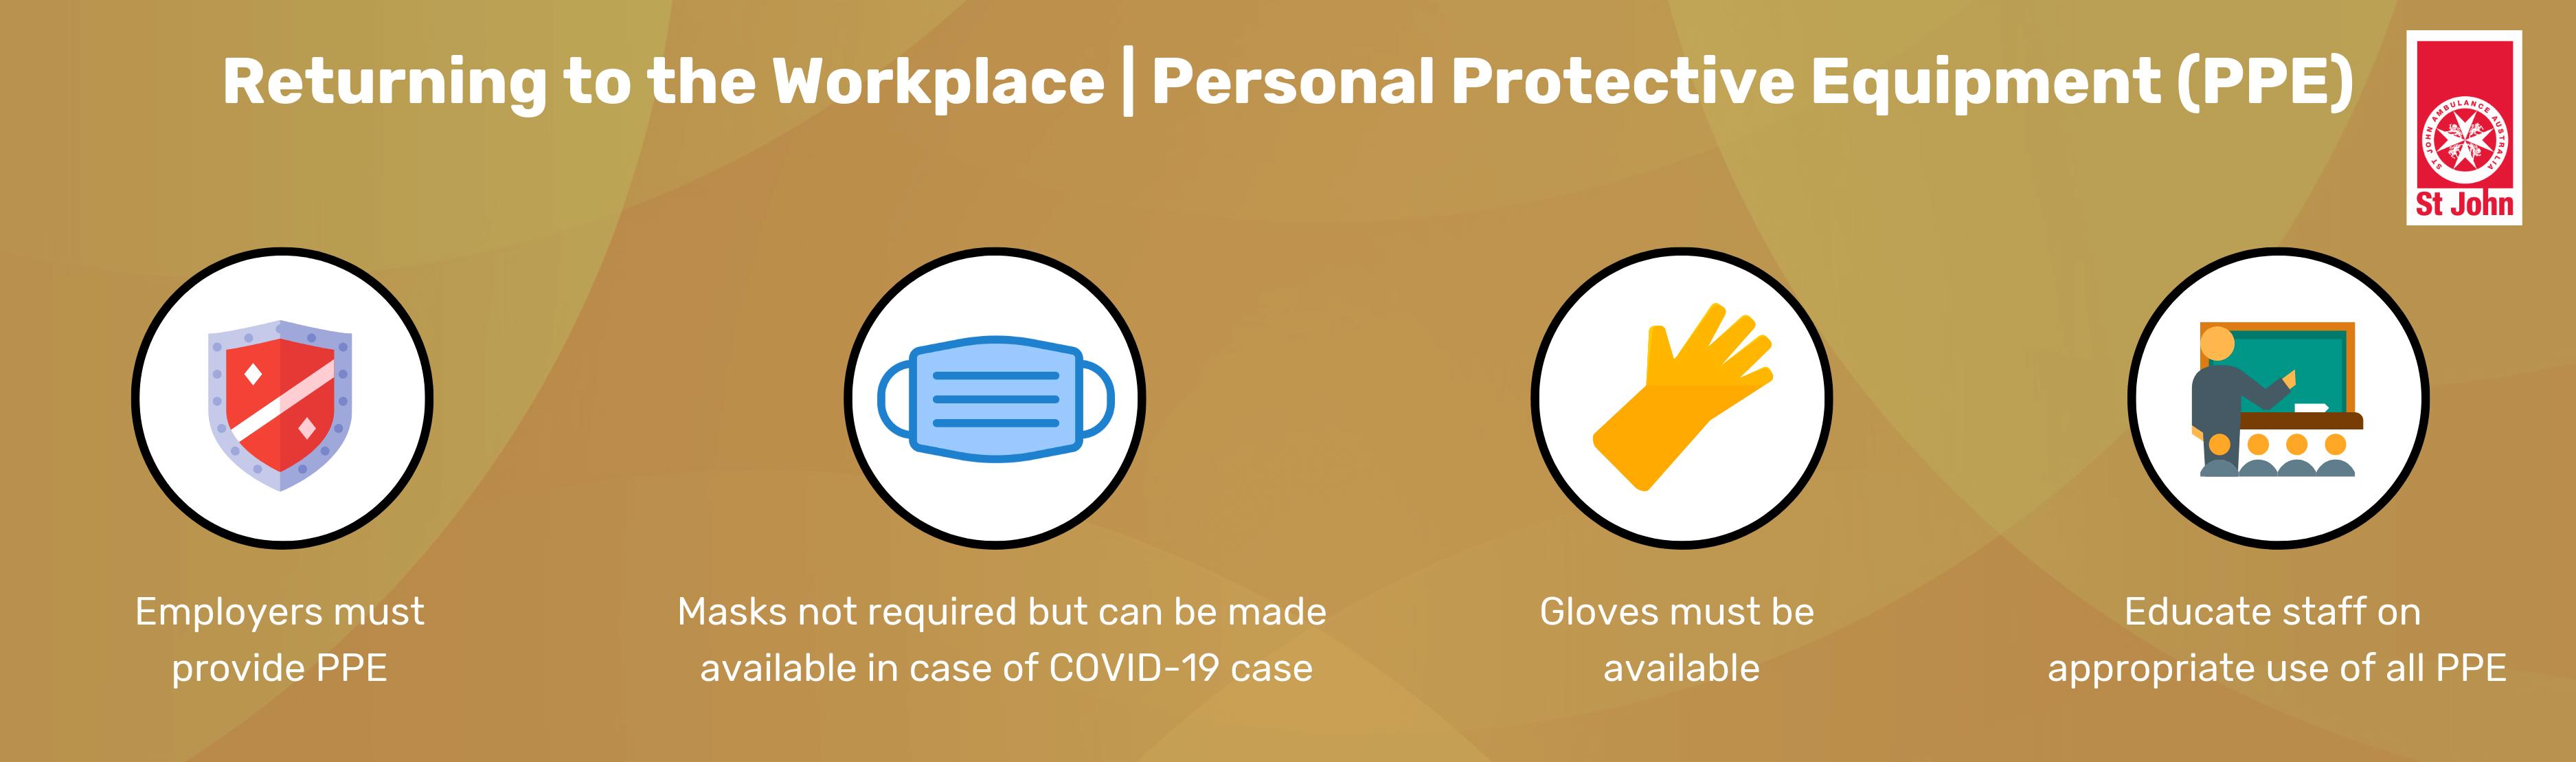 Returning to the Workplace During COVID-19 Personal Protective Equipment PPE